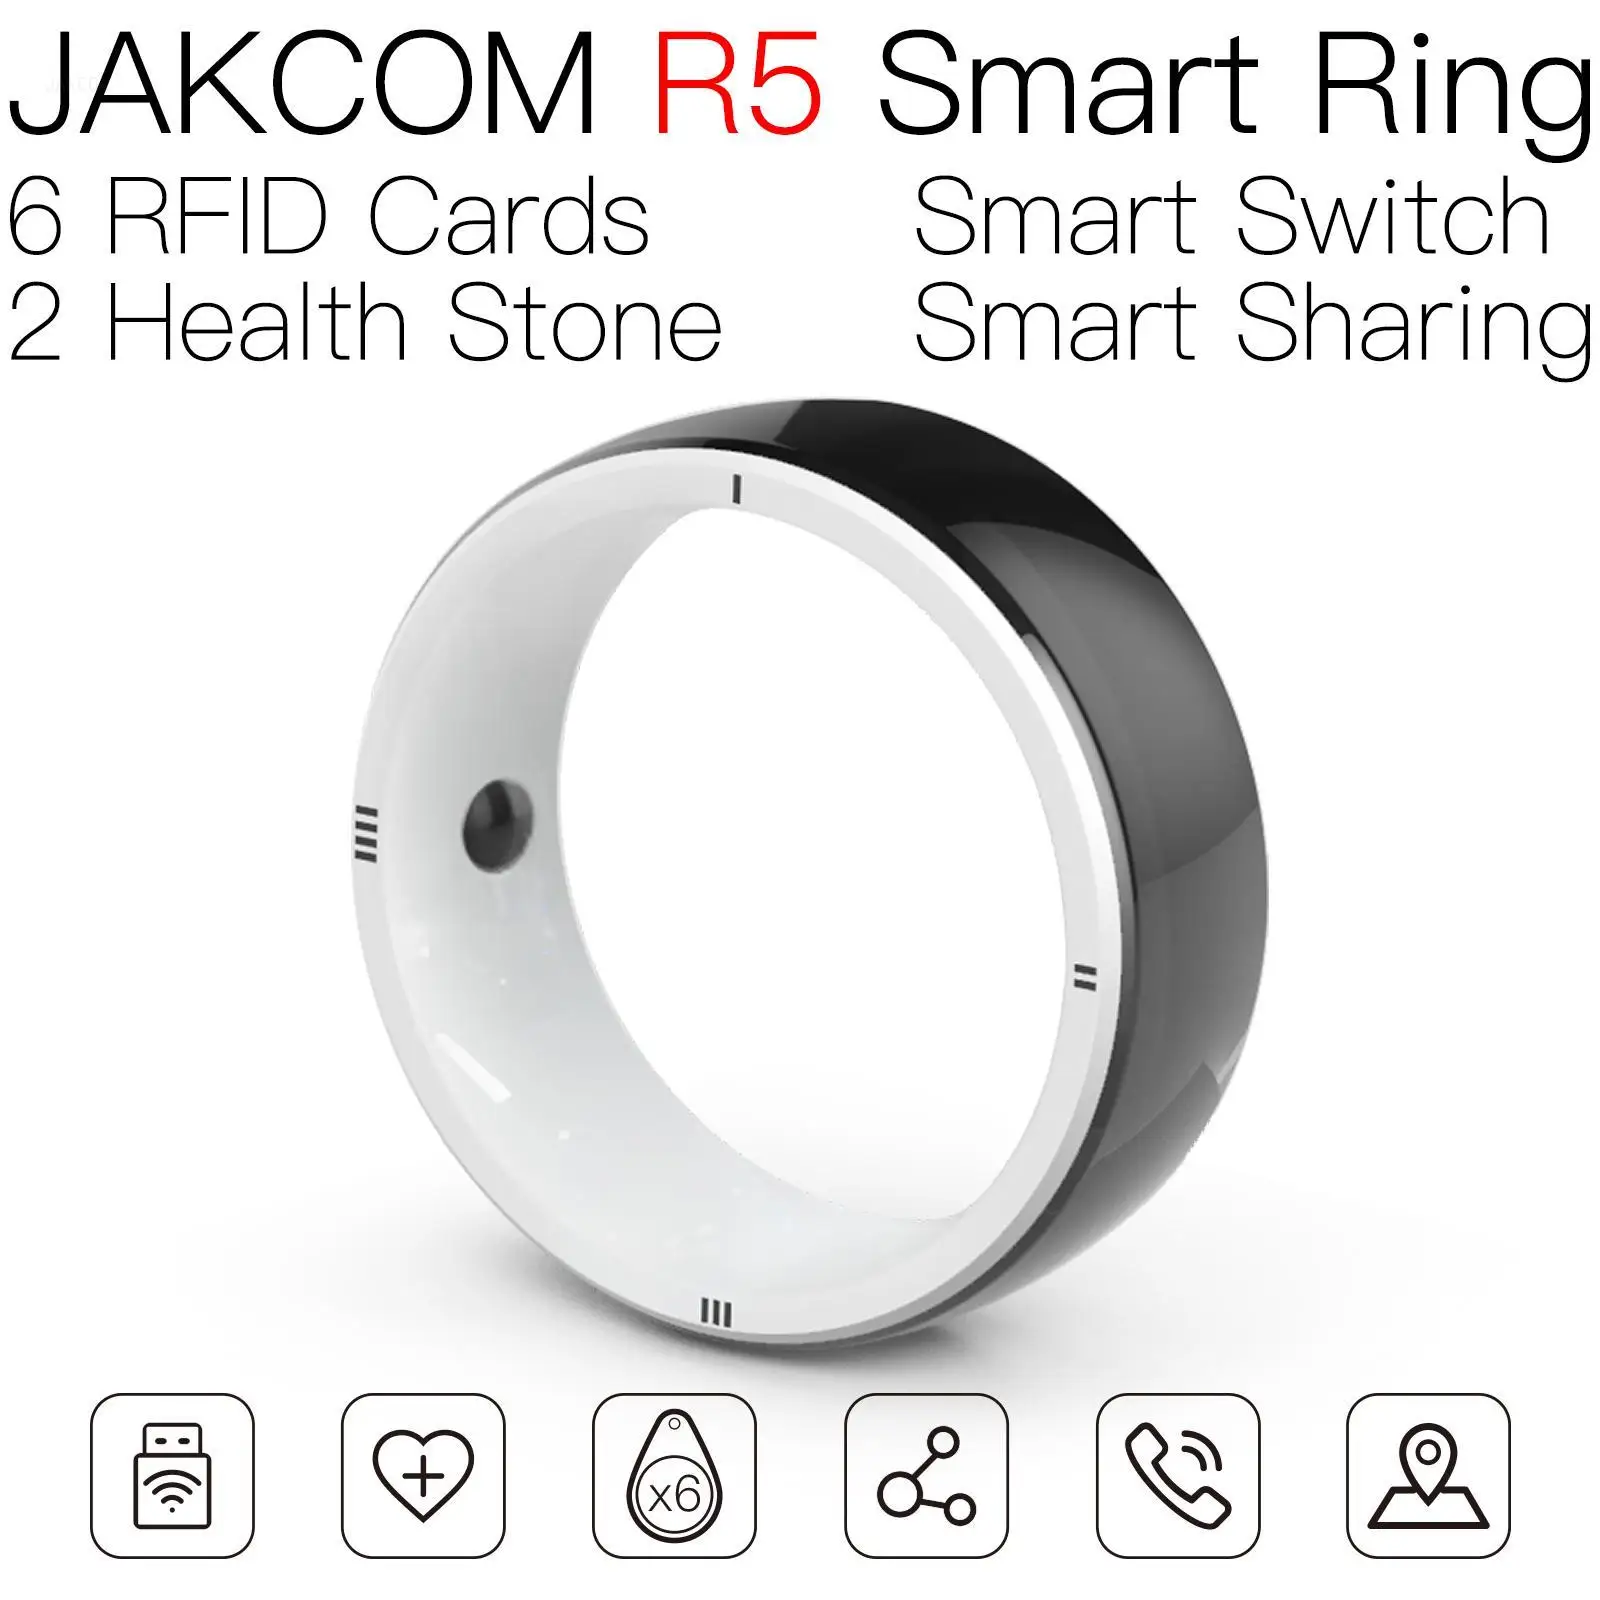 

JAKCOM R5 Smart Ring Super value than label sticker tag sa828 uhf pps nfc tags 6 in 1 key card hacking machine rfid protection